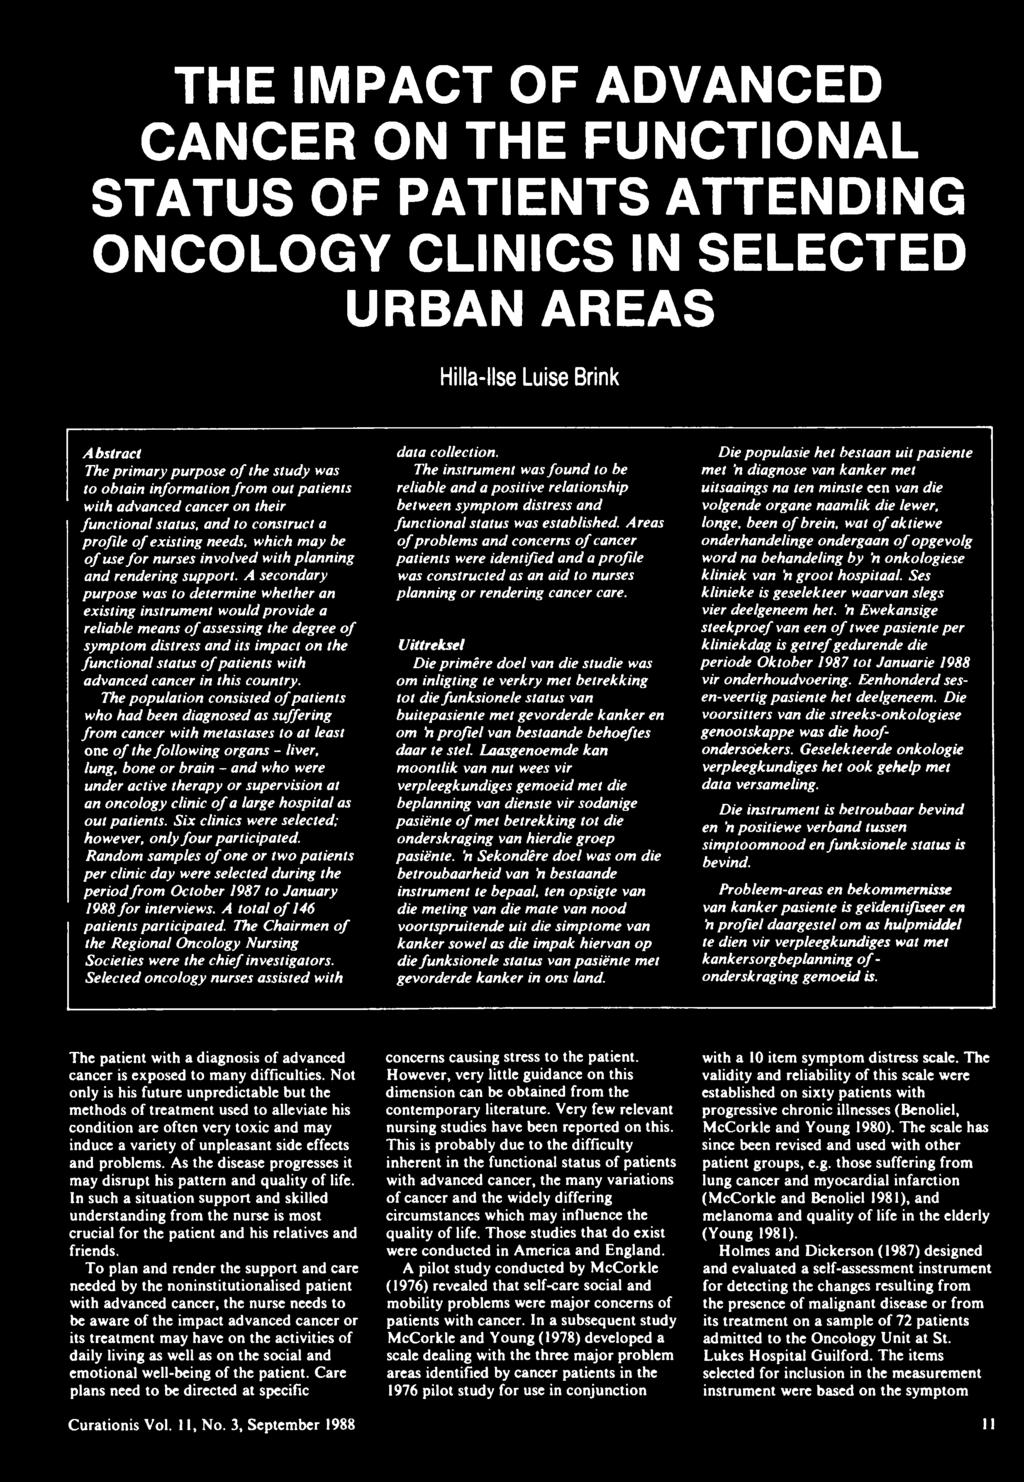 THE IMPACT OF ADVANCED CANCER ON THE FUNCTIONAL STATUS OF PATIENTS ATTENDING ONCOLOGY CLINICS IN SELECTED URBAN AREAS Hilla-llse Luise Brink Abstract The primary purpose o f the study was to obtain